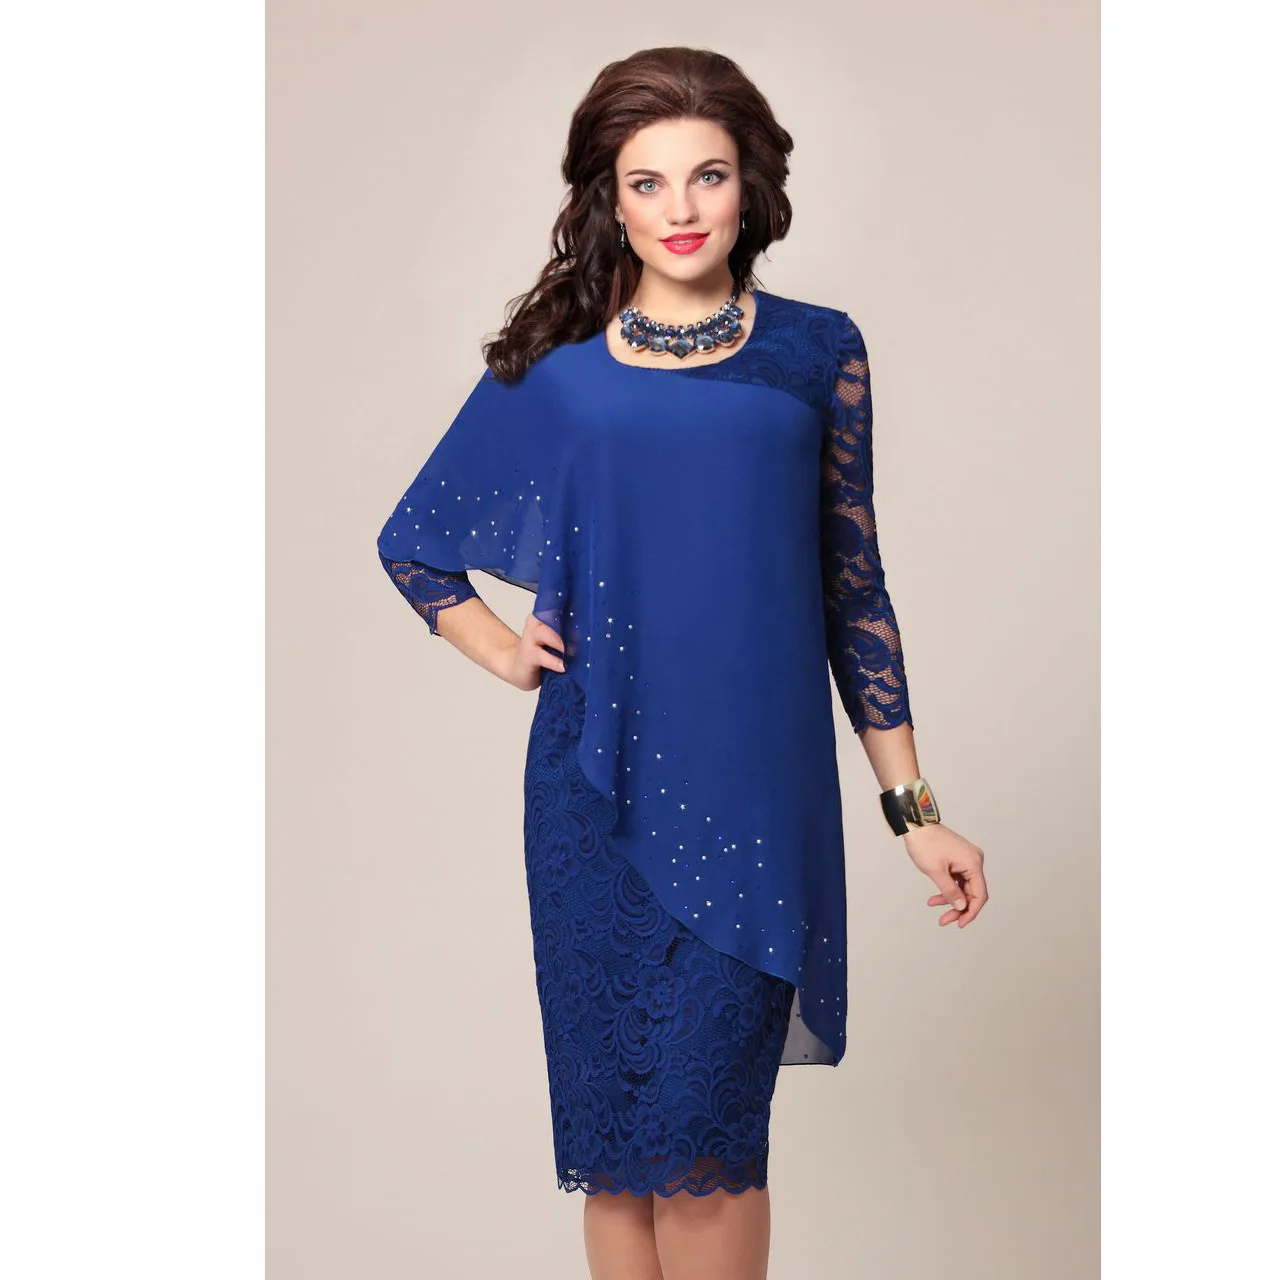 Z18062502 Plus Size Solid Three Quarter Sleeve Summer Lace Party ...